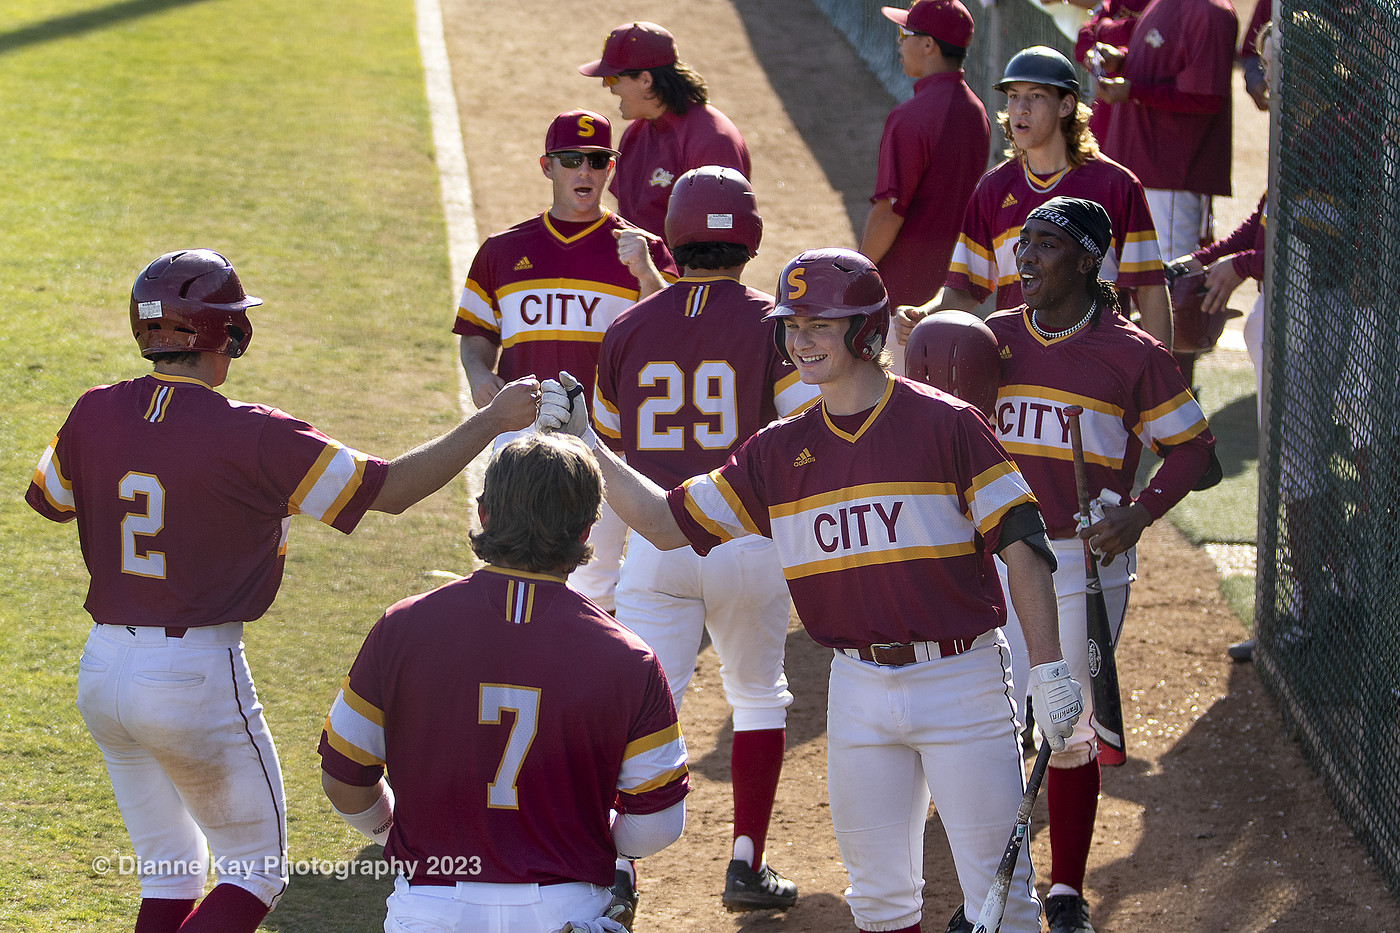 City's bats come alive in game two as they score 16 runs on 13 hits to beat Modesto; Isola goes 3x5 with a HR and 4 RBI's and Lake goes 3x5 with two doubles and 2 RBI's